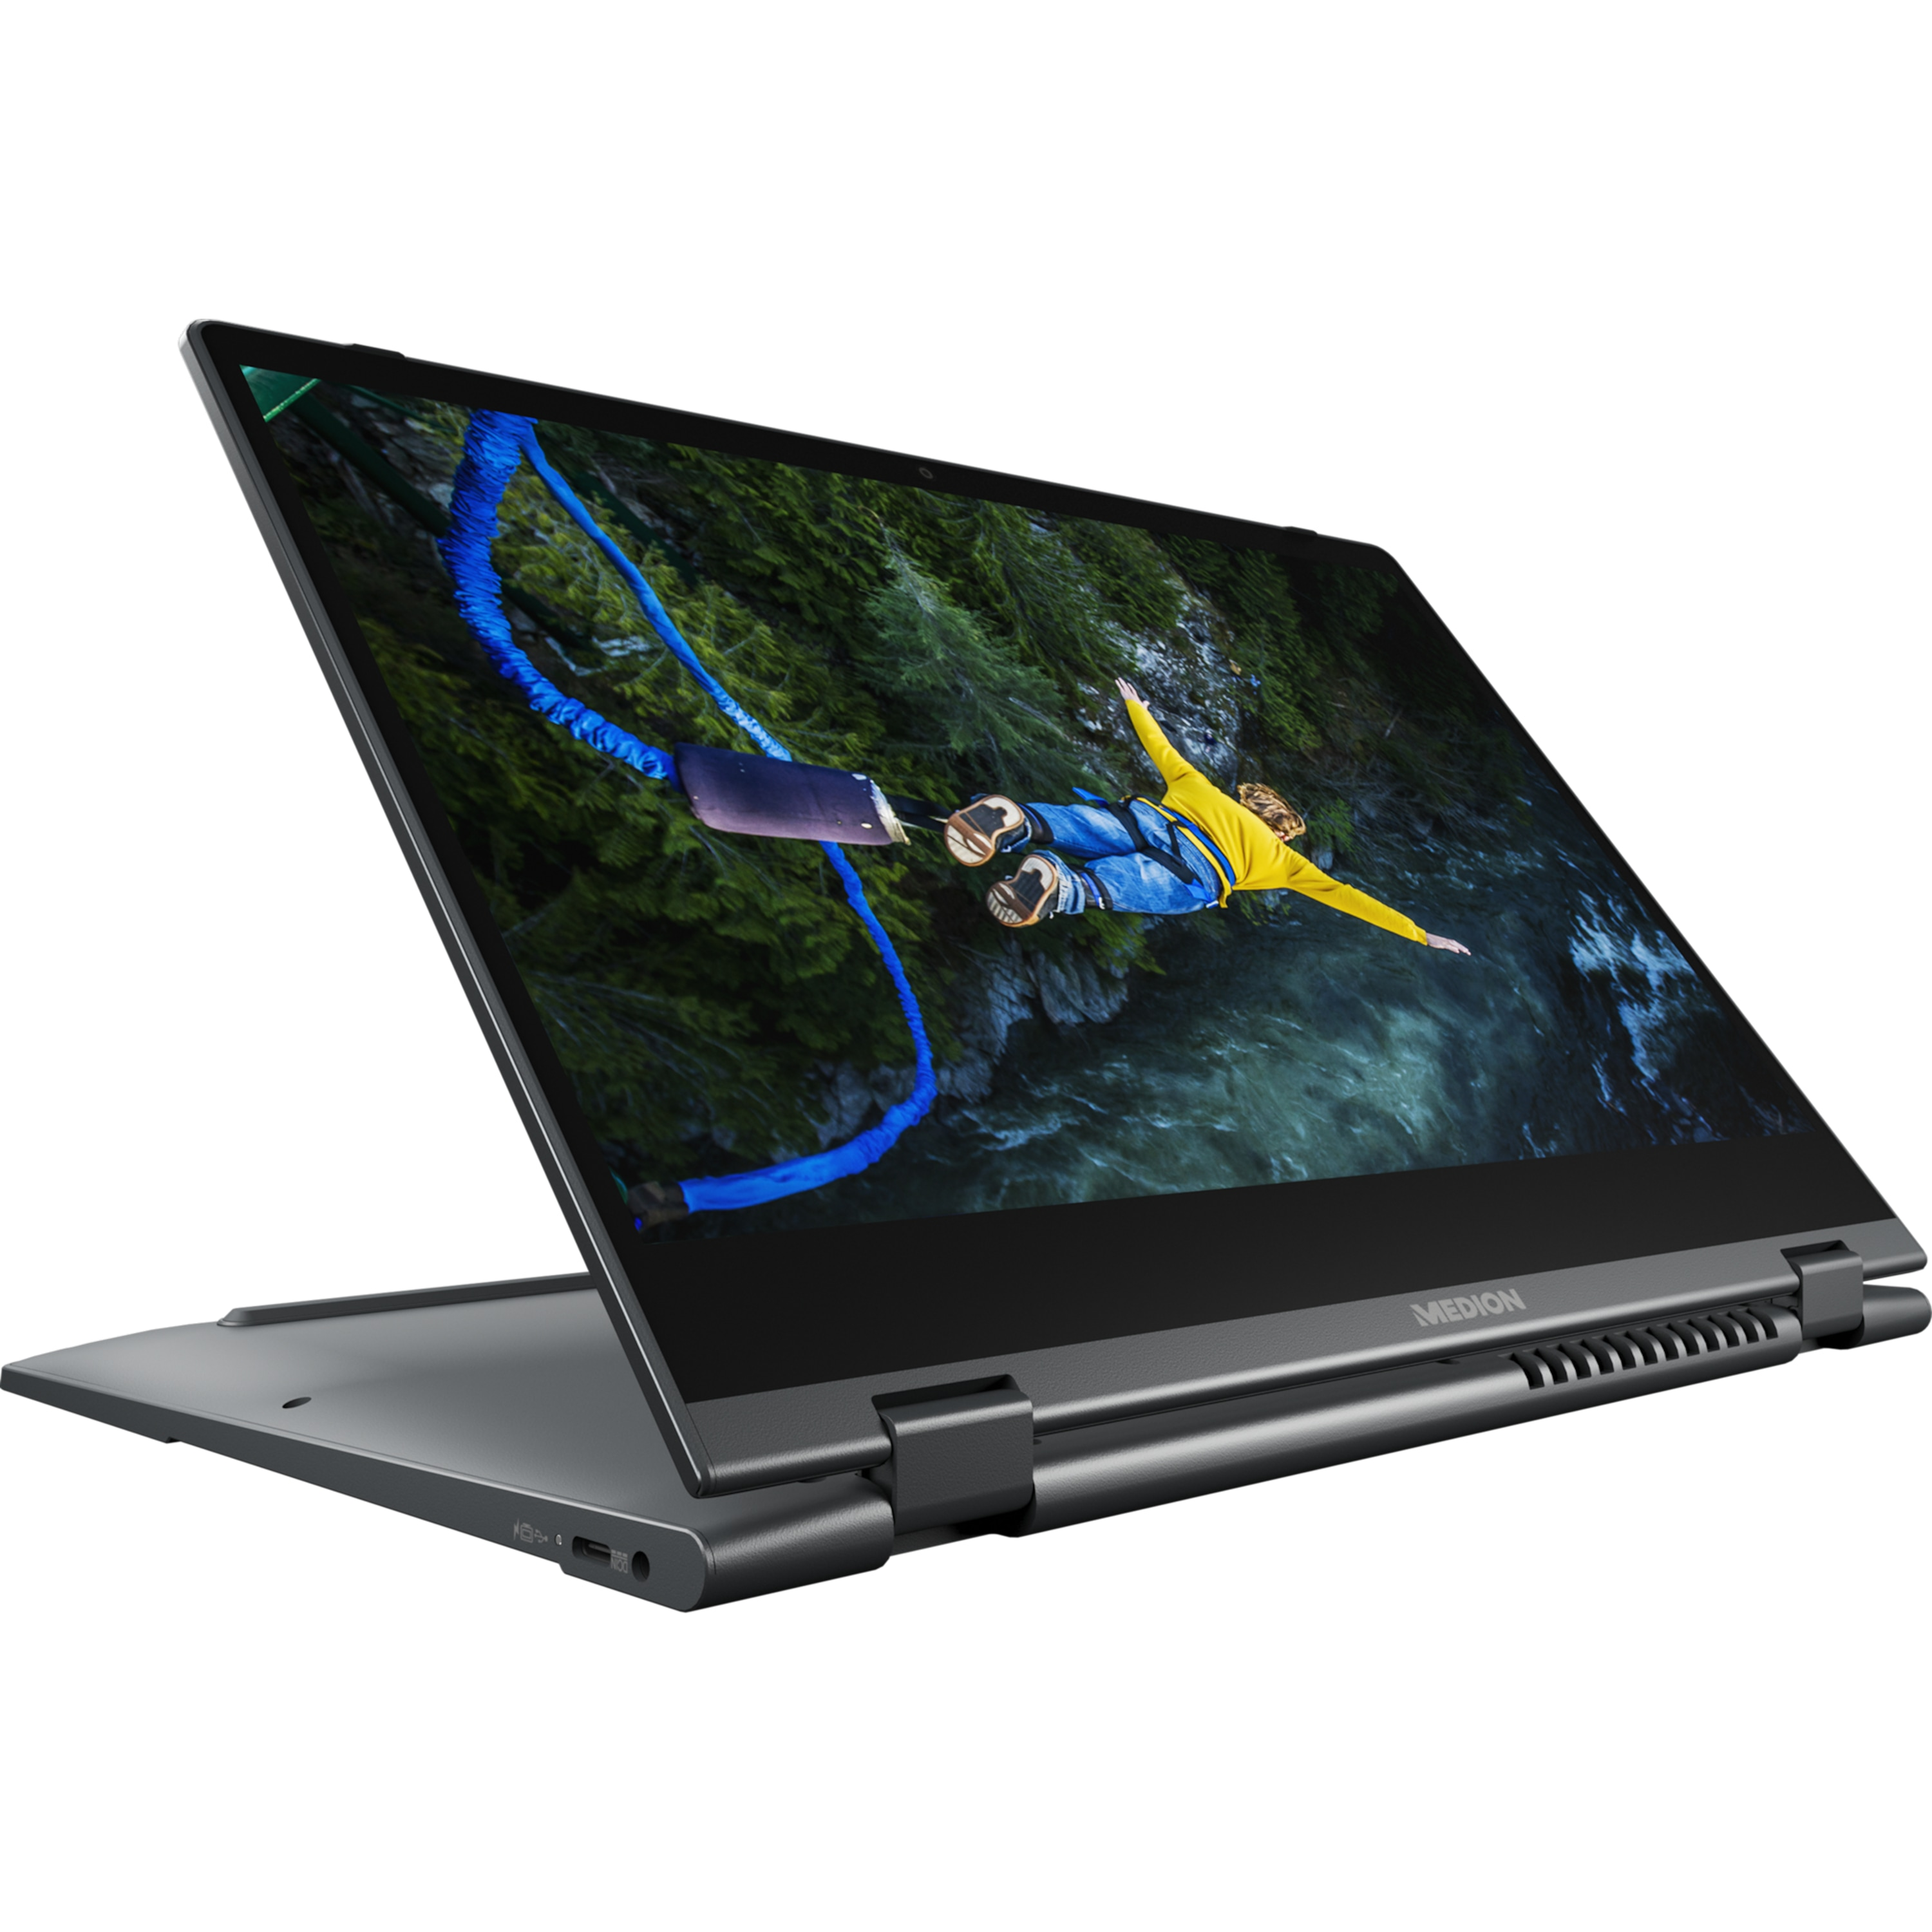 Intel® Notebook 512 Convertible 14 Display, 8 RAM, GB E14413 i3 GB Prozessor, mit Core™ blau MEDION Touchscreen, Touch Display Zoll SSD,